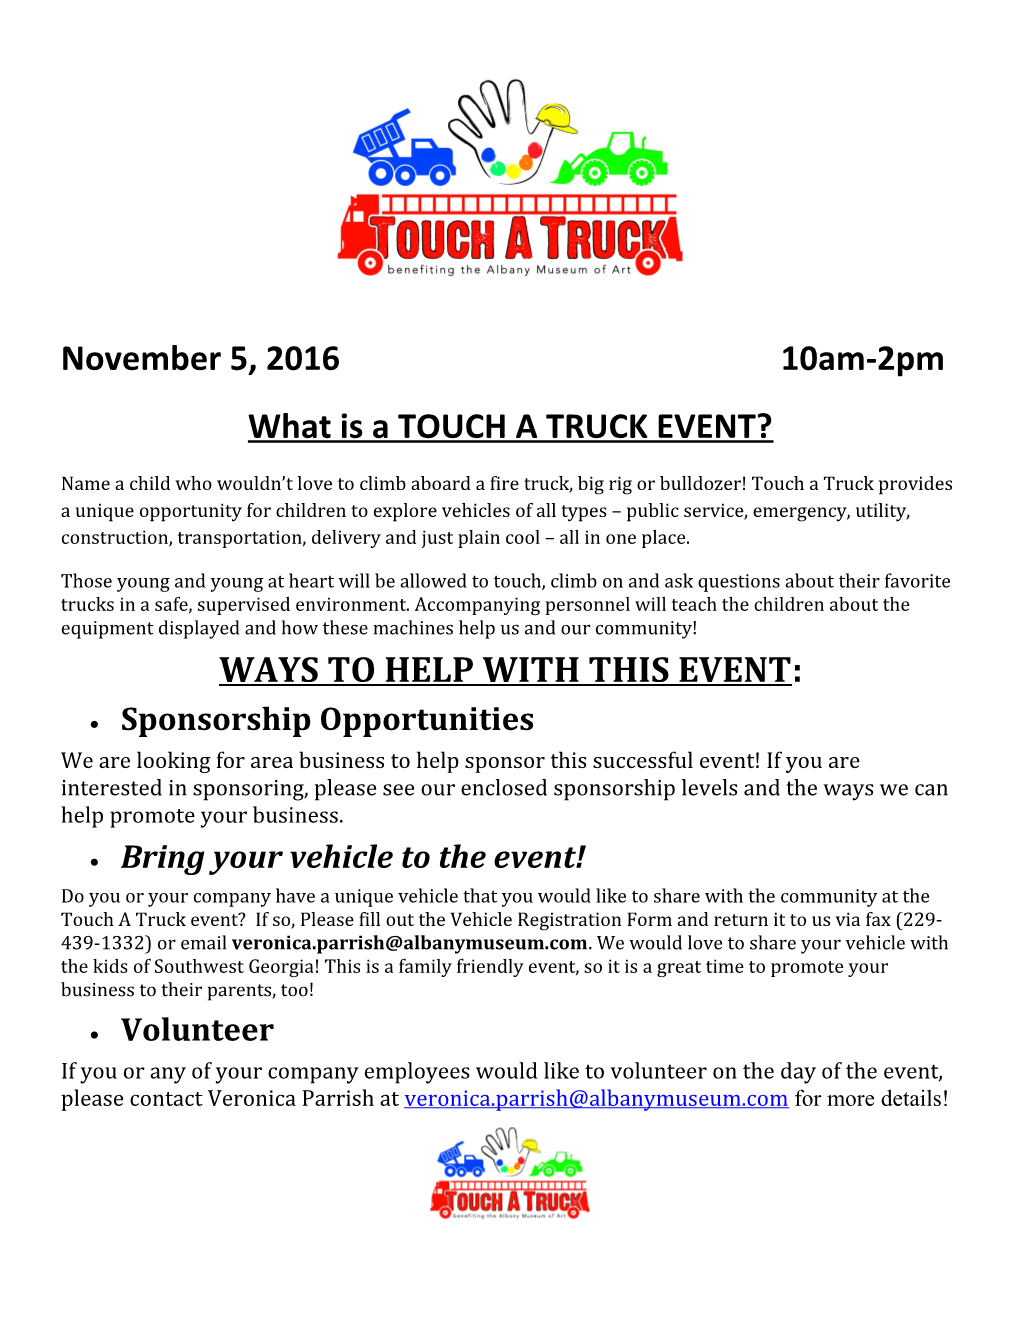 What Is a TOUCH a TRUCK EVENT?